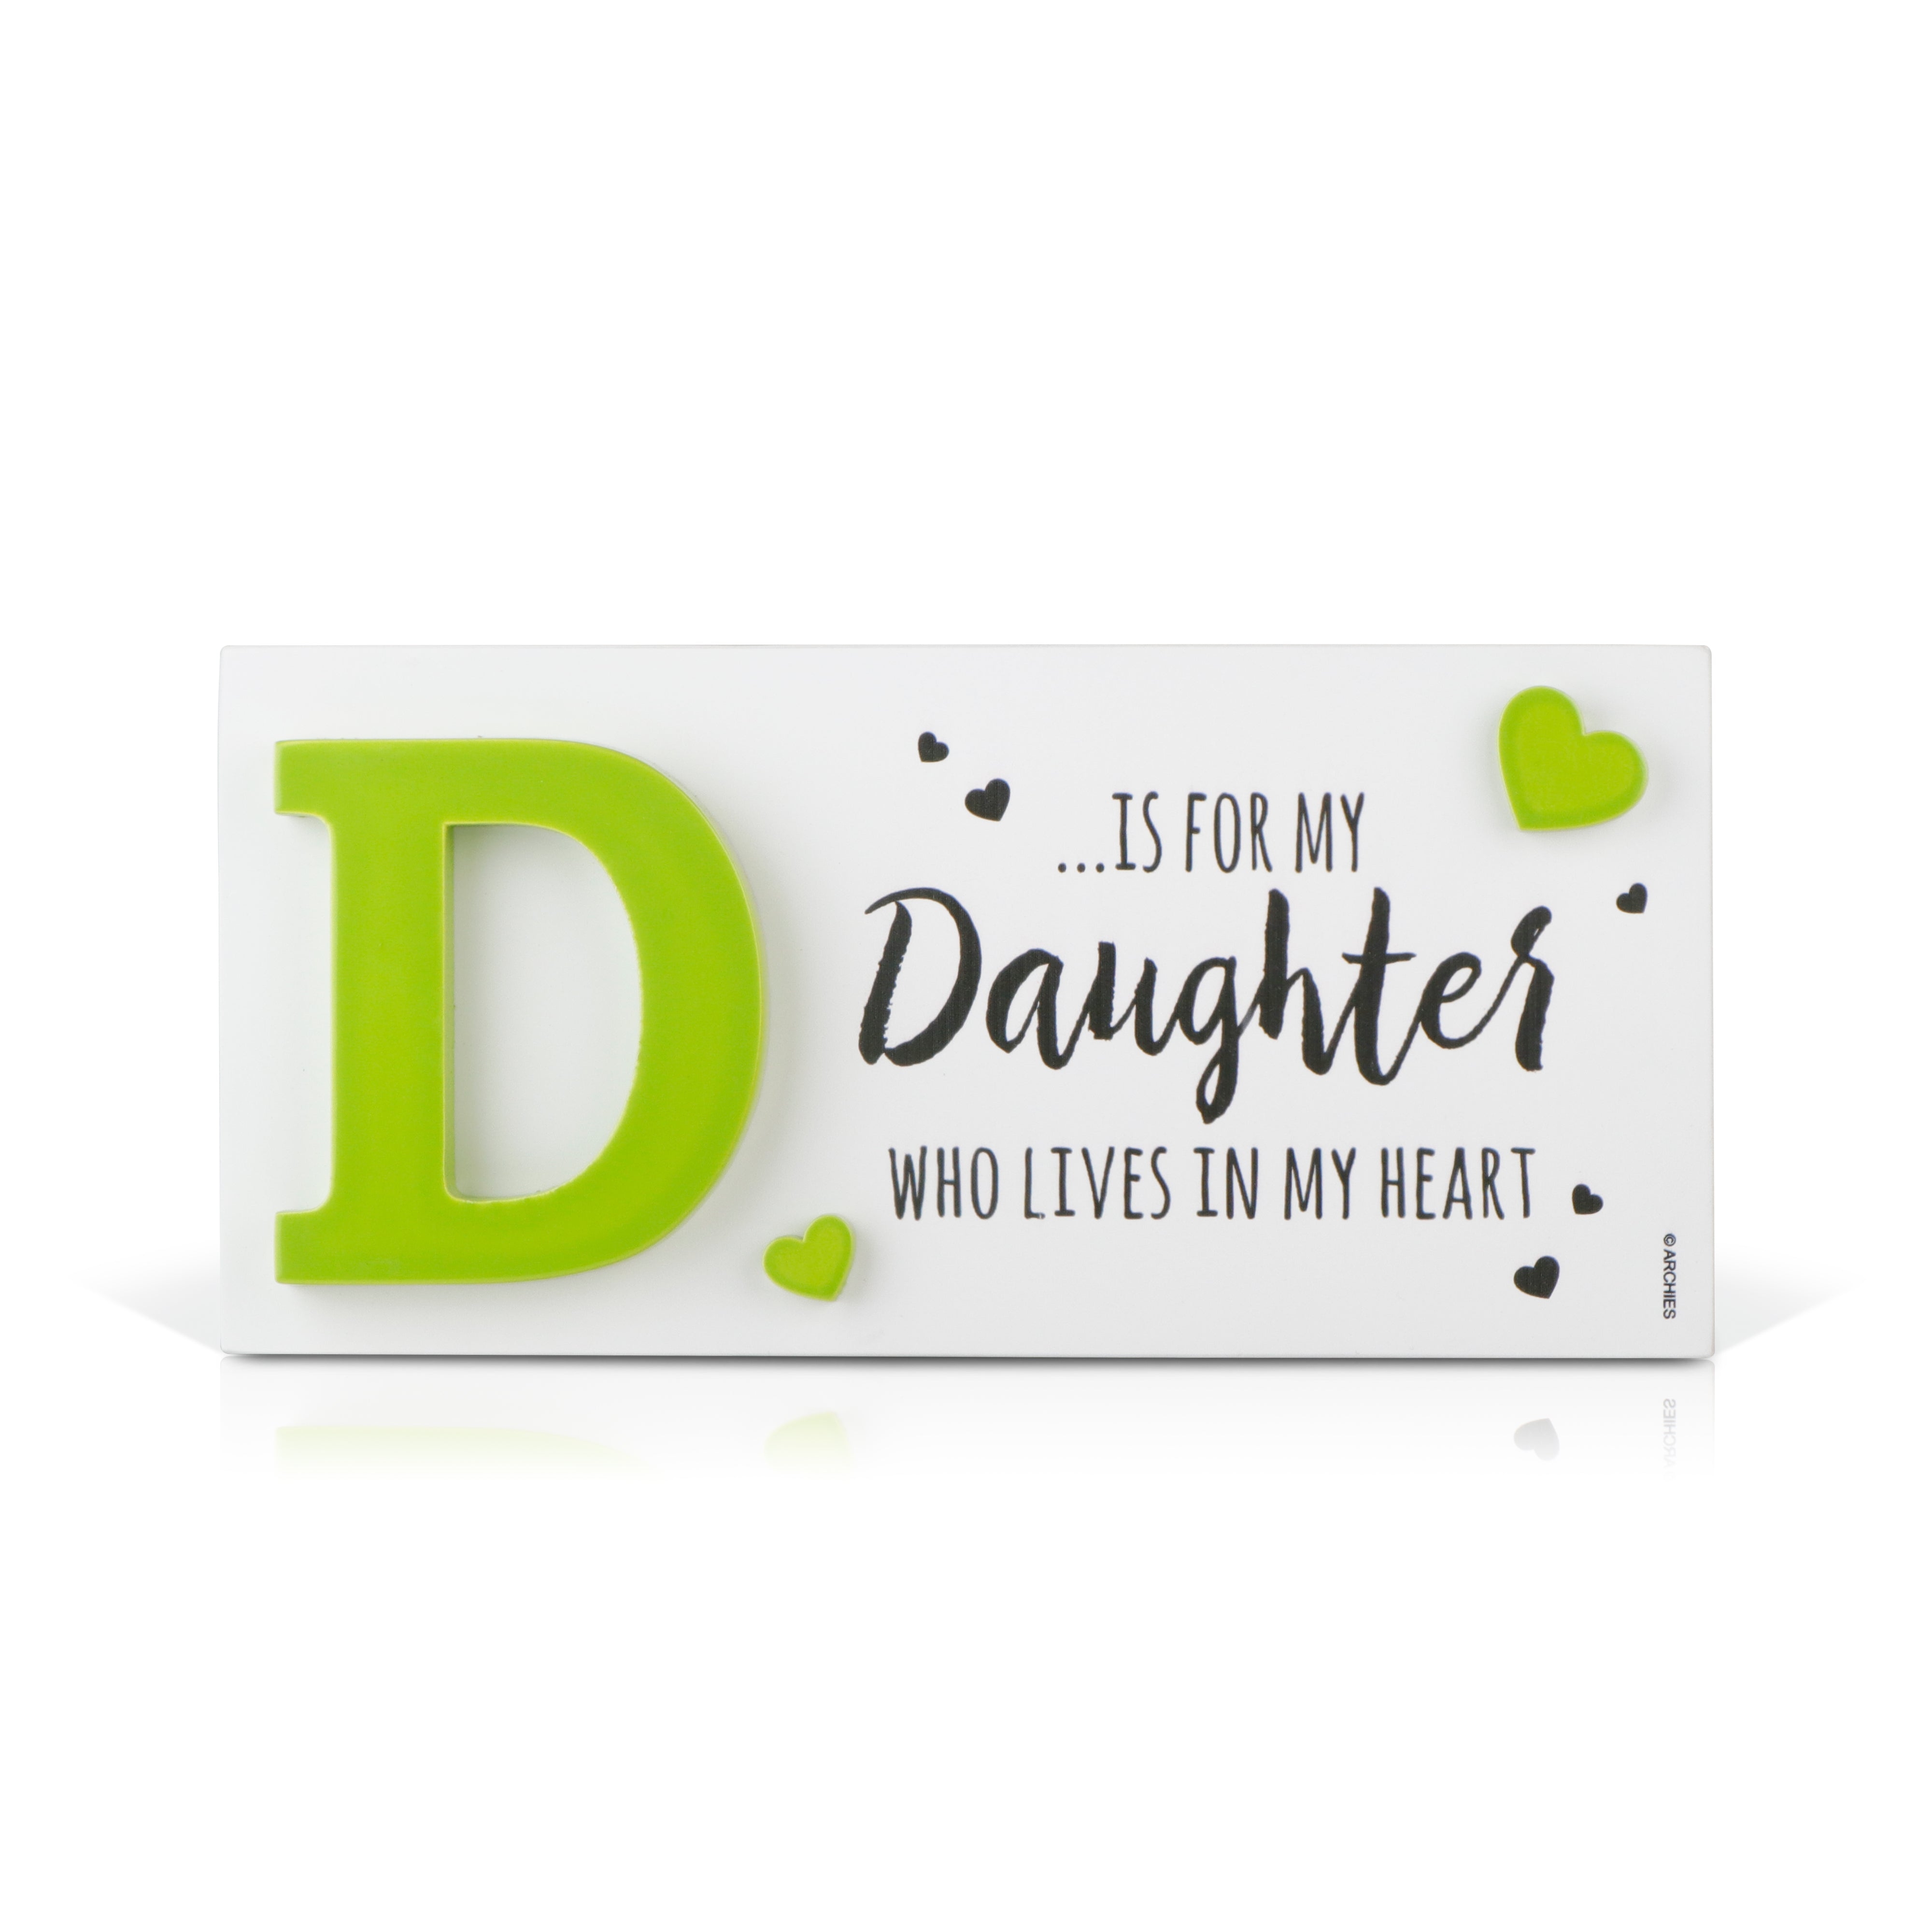 Archies | Archies KEEP SAKE Daughter Gift Combo with Ceramic Mug and Elevated Initial Quotation - with a FREE GREETING CARD 6